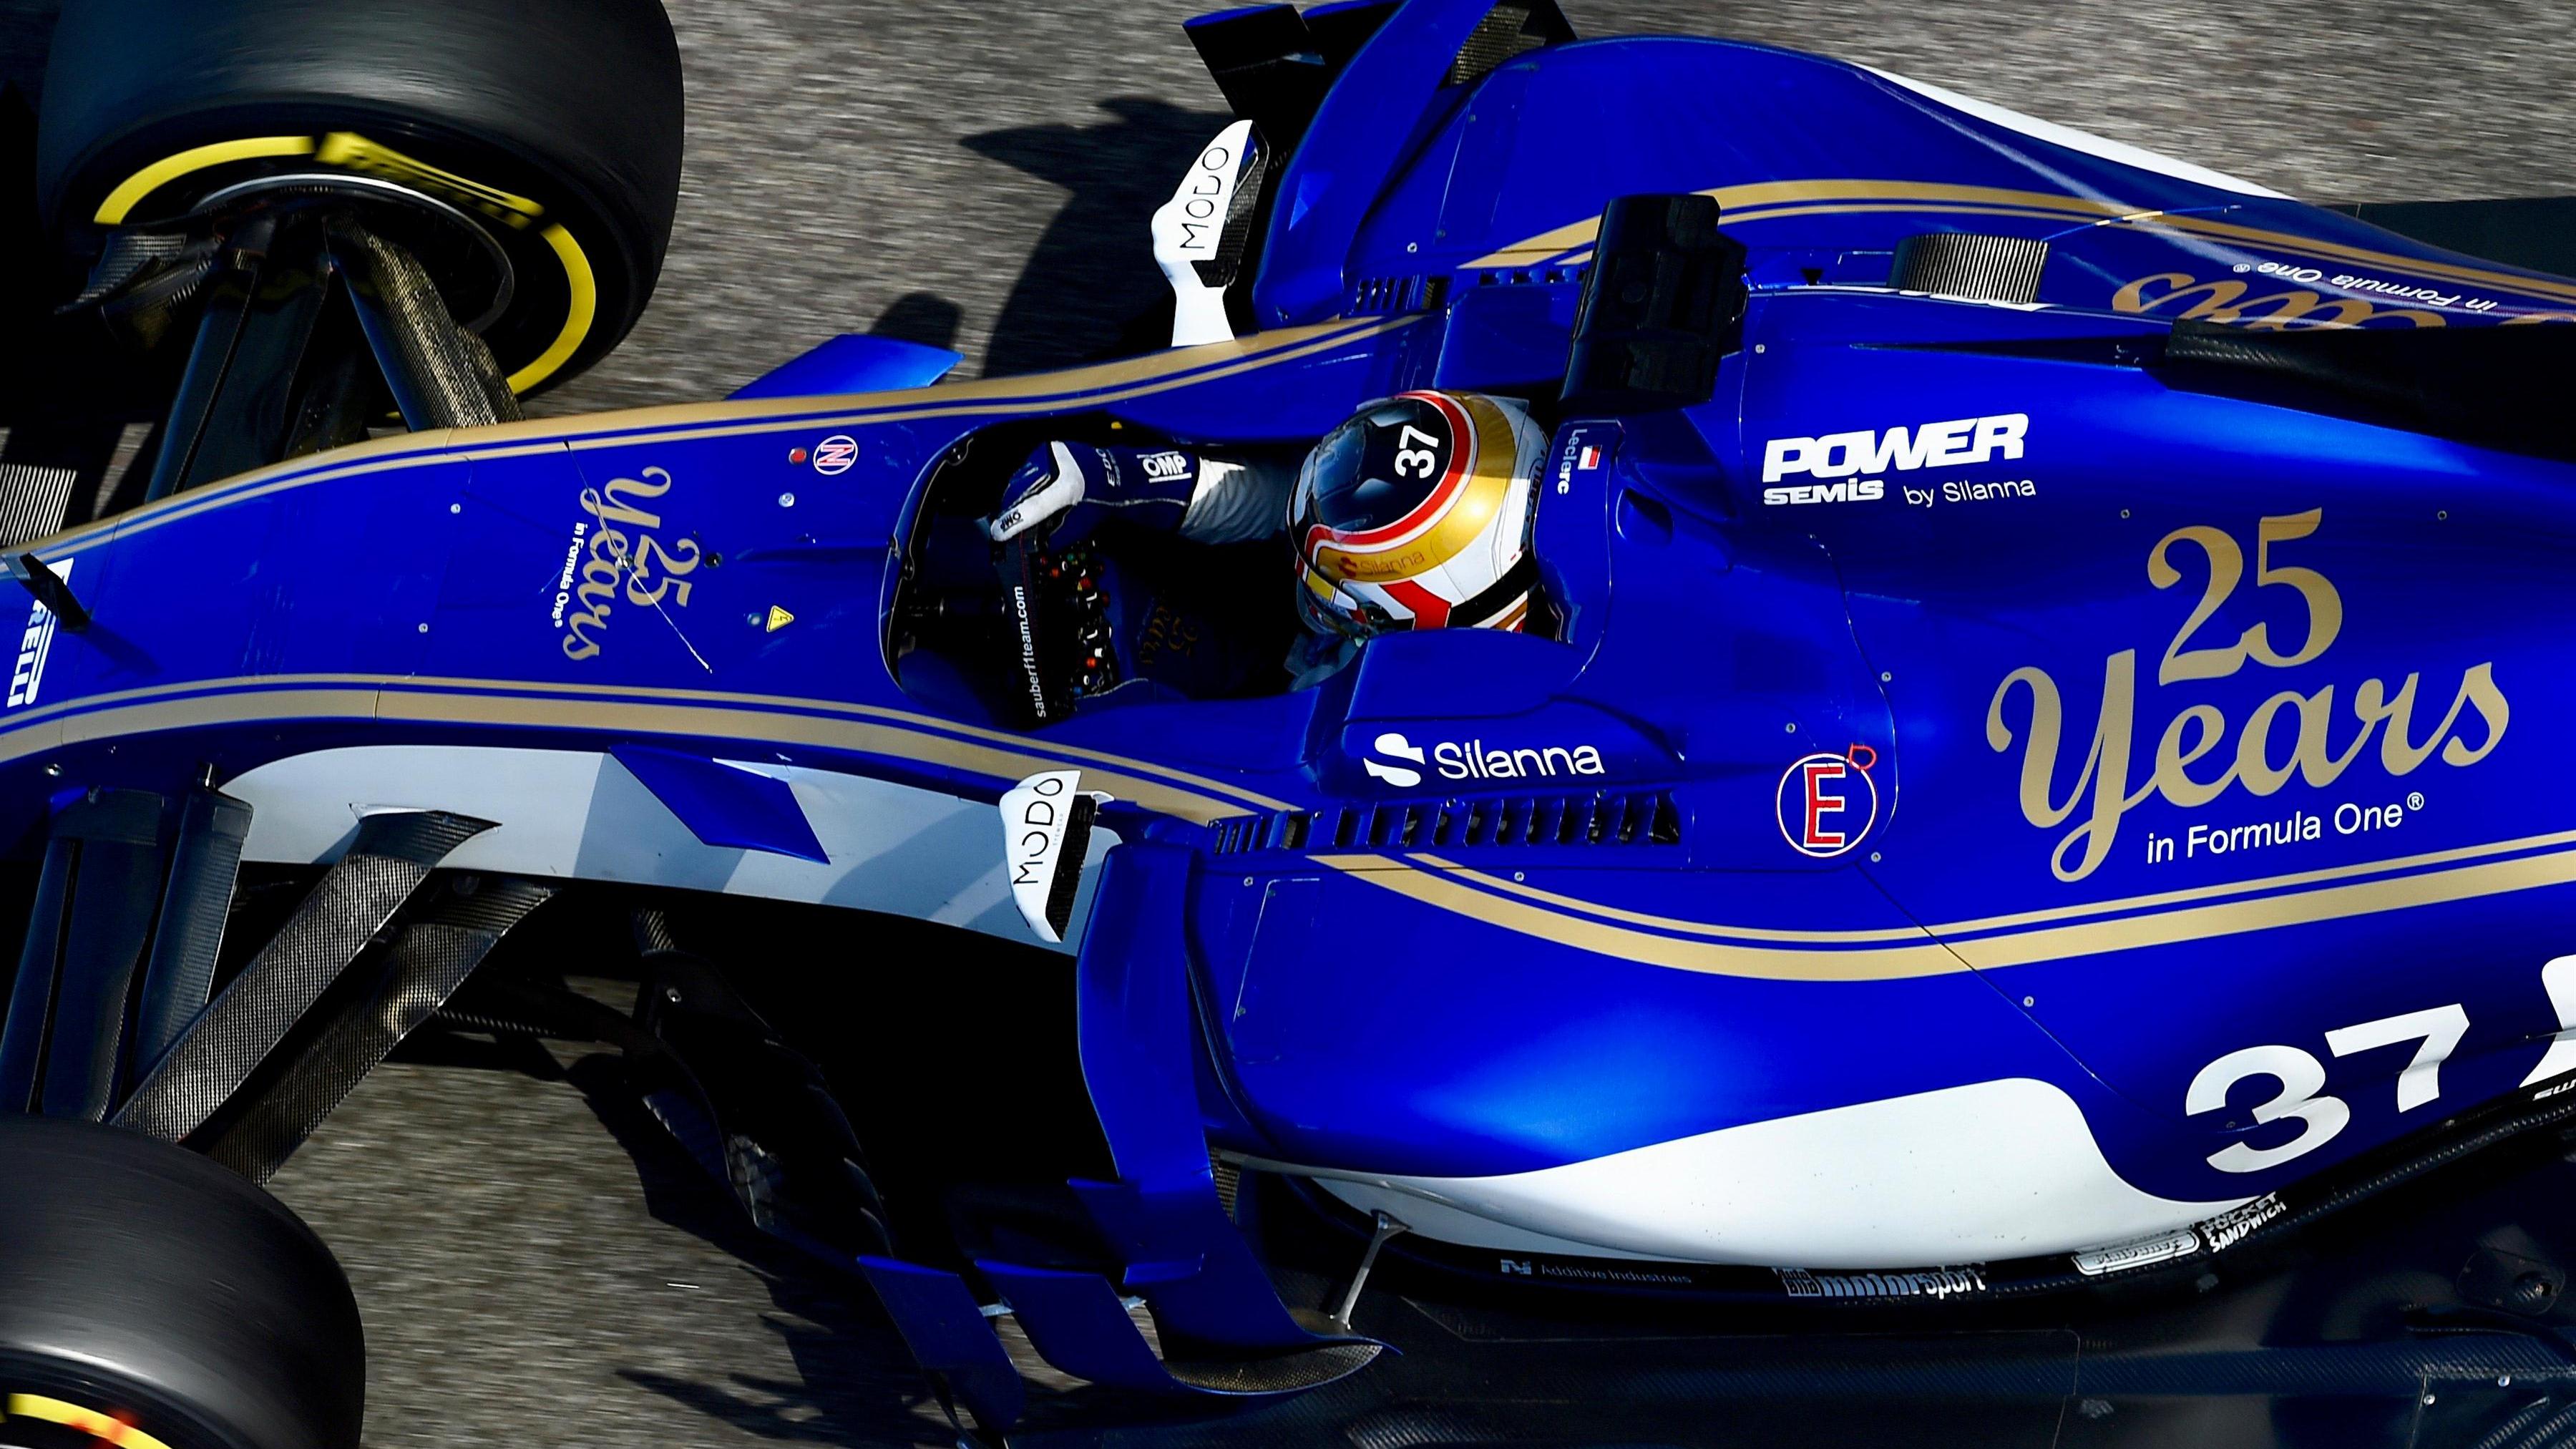 Sauber full of expectations for 2018